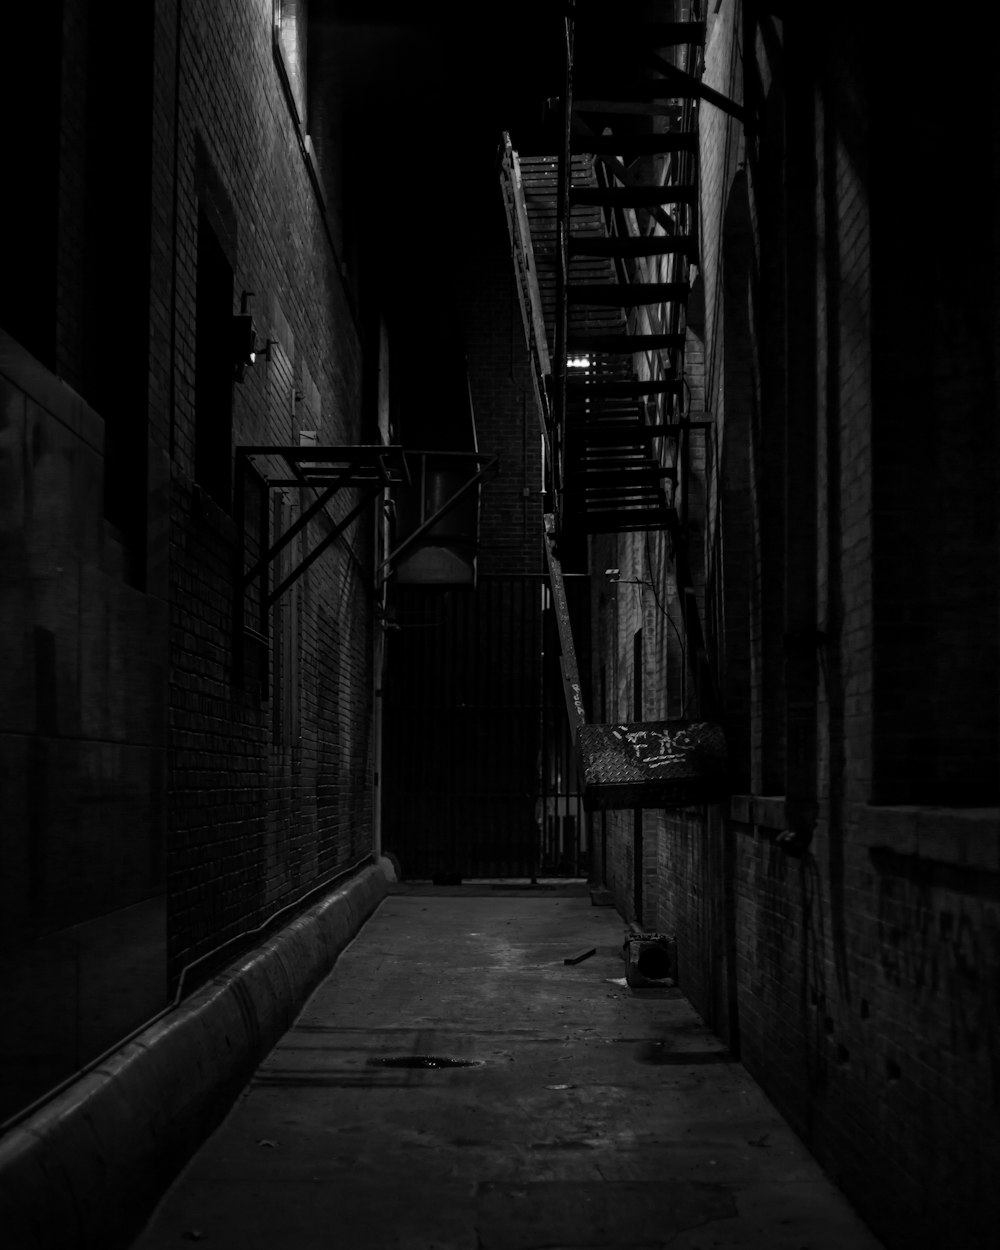 a dark alley way with a fire escape